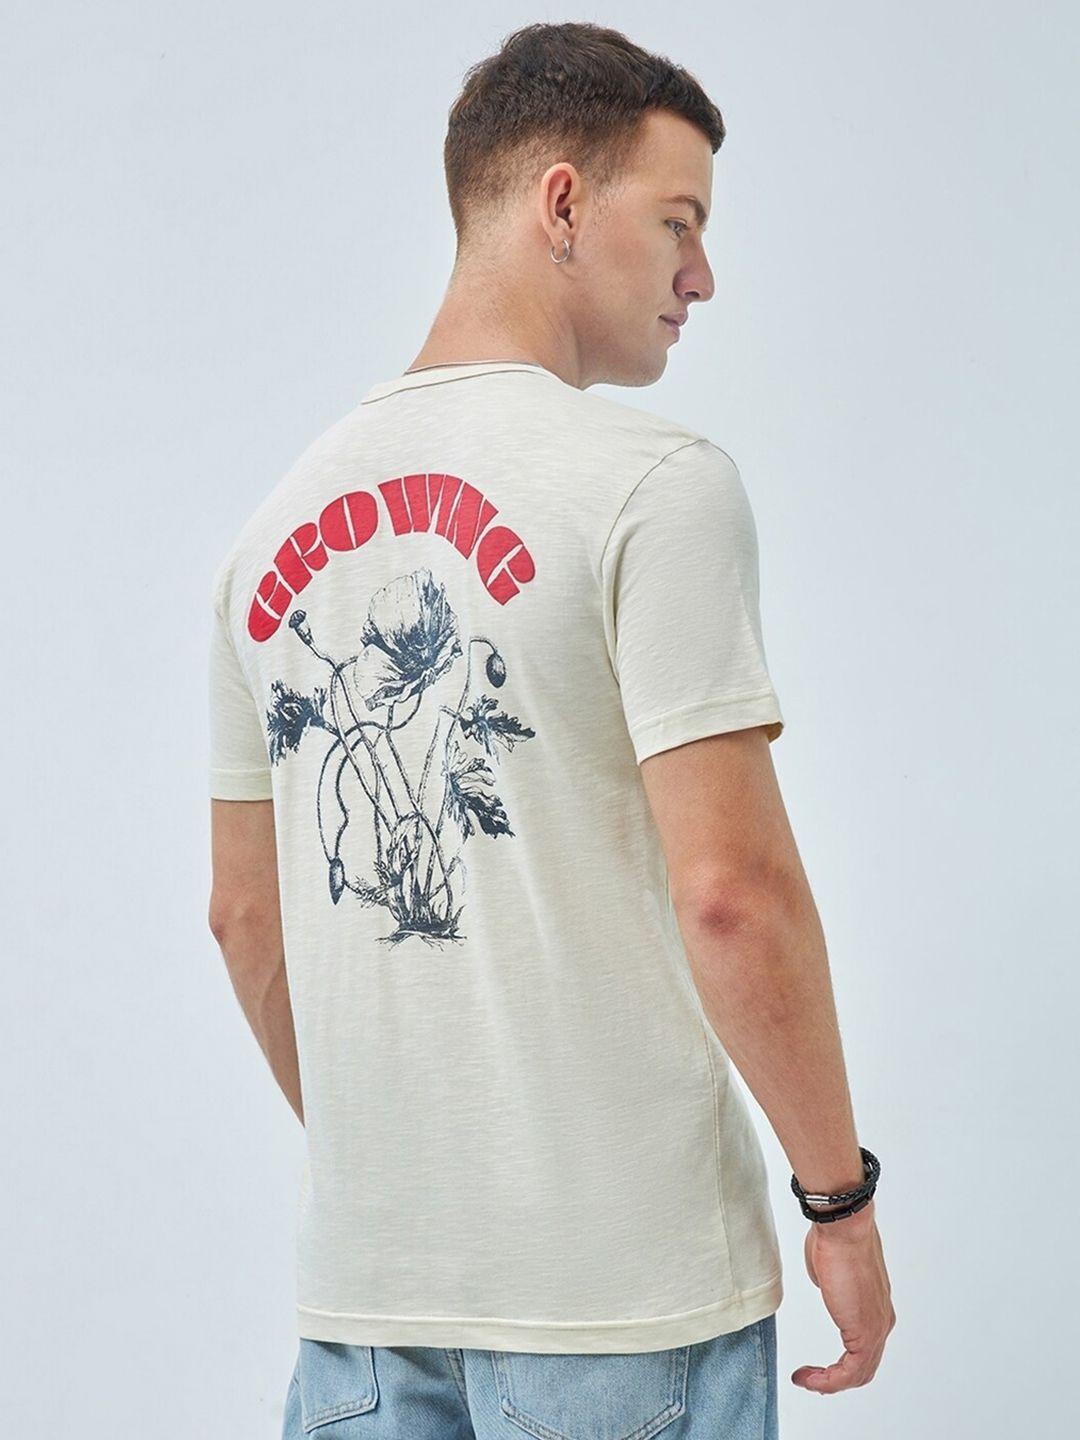 bewakoof off white and red graphic printed pure cotton t-shirt